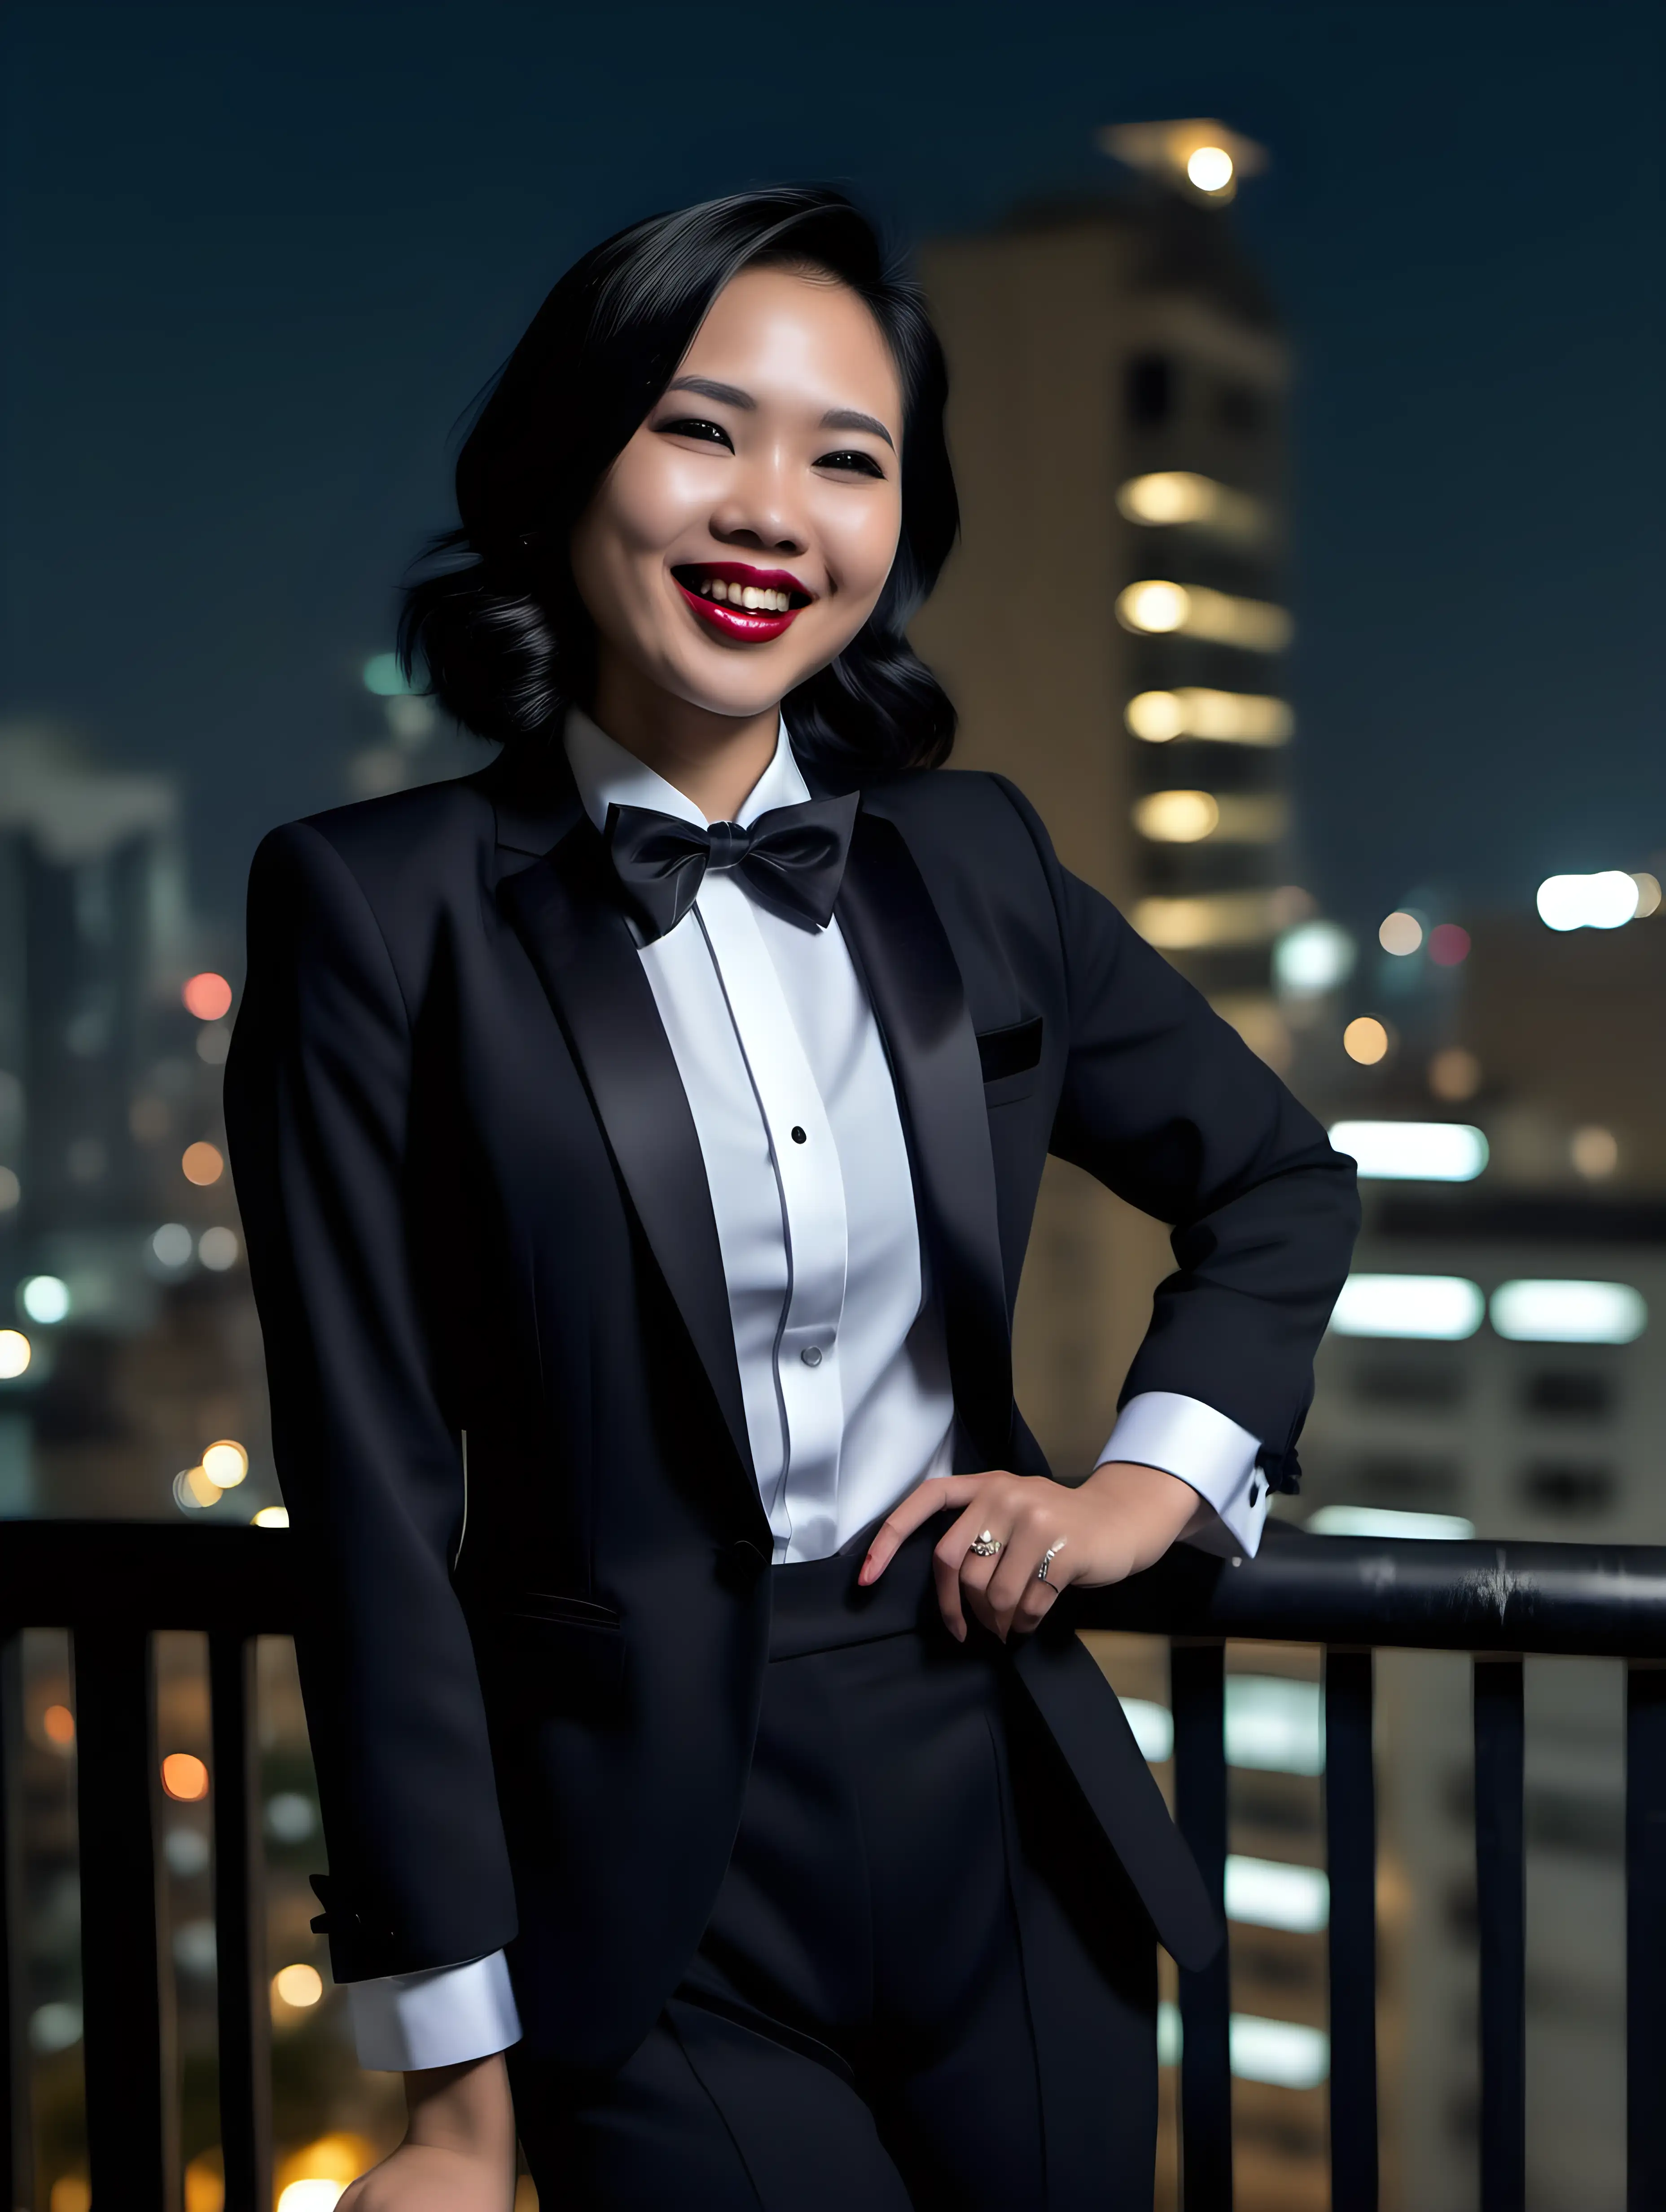 Stylish-Vietnamese-Woman-in-Tuxedo-Laughing-on-Urban-Rooftop-at-Night